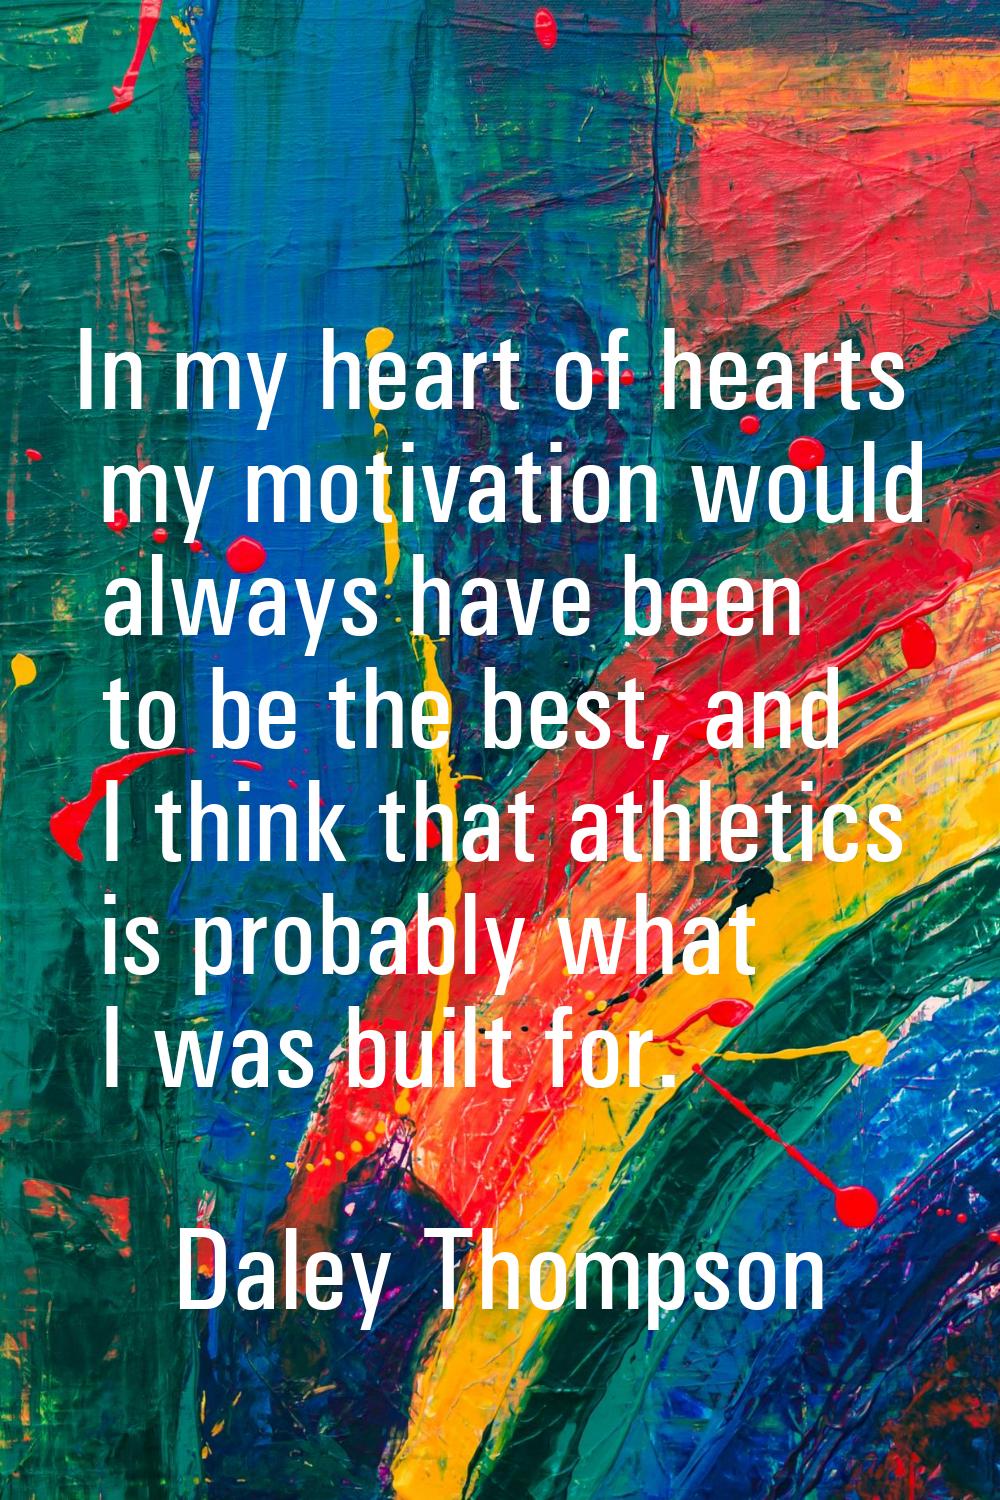 In my heart of hearts my motivation would always have been to be the best, and I think that athleti